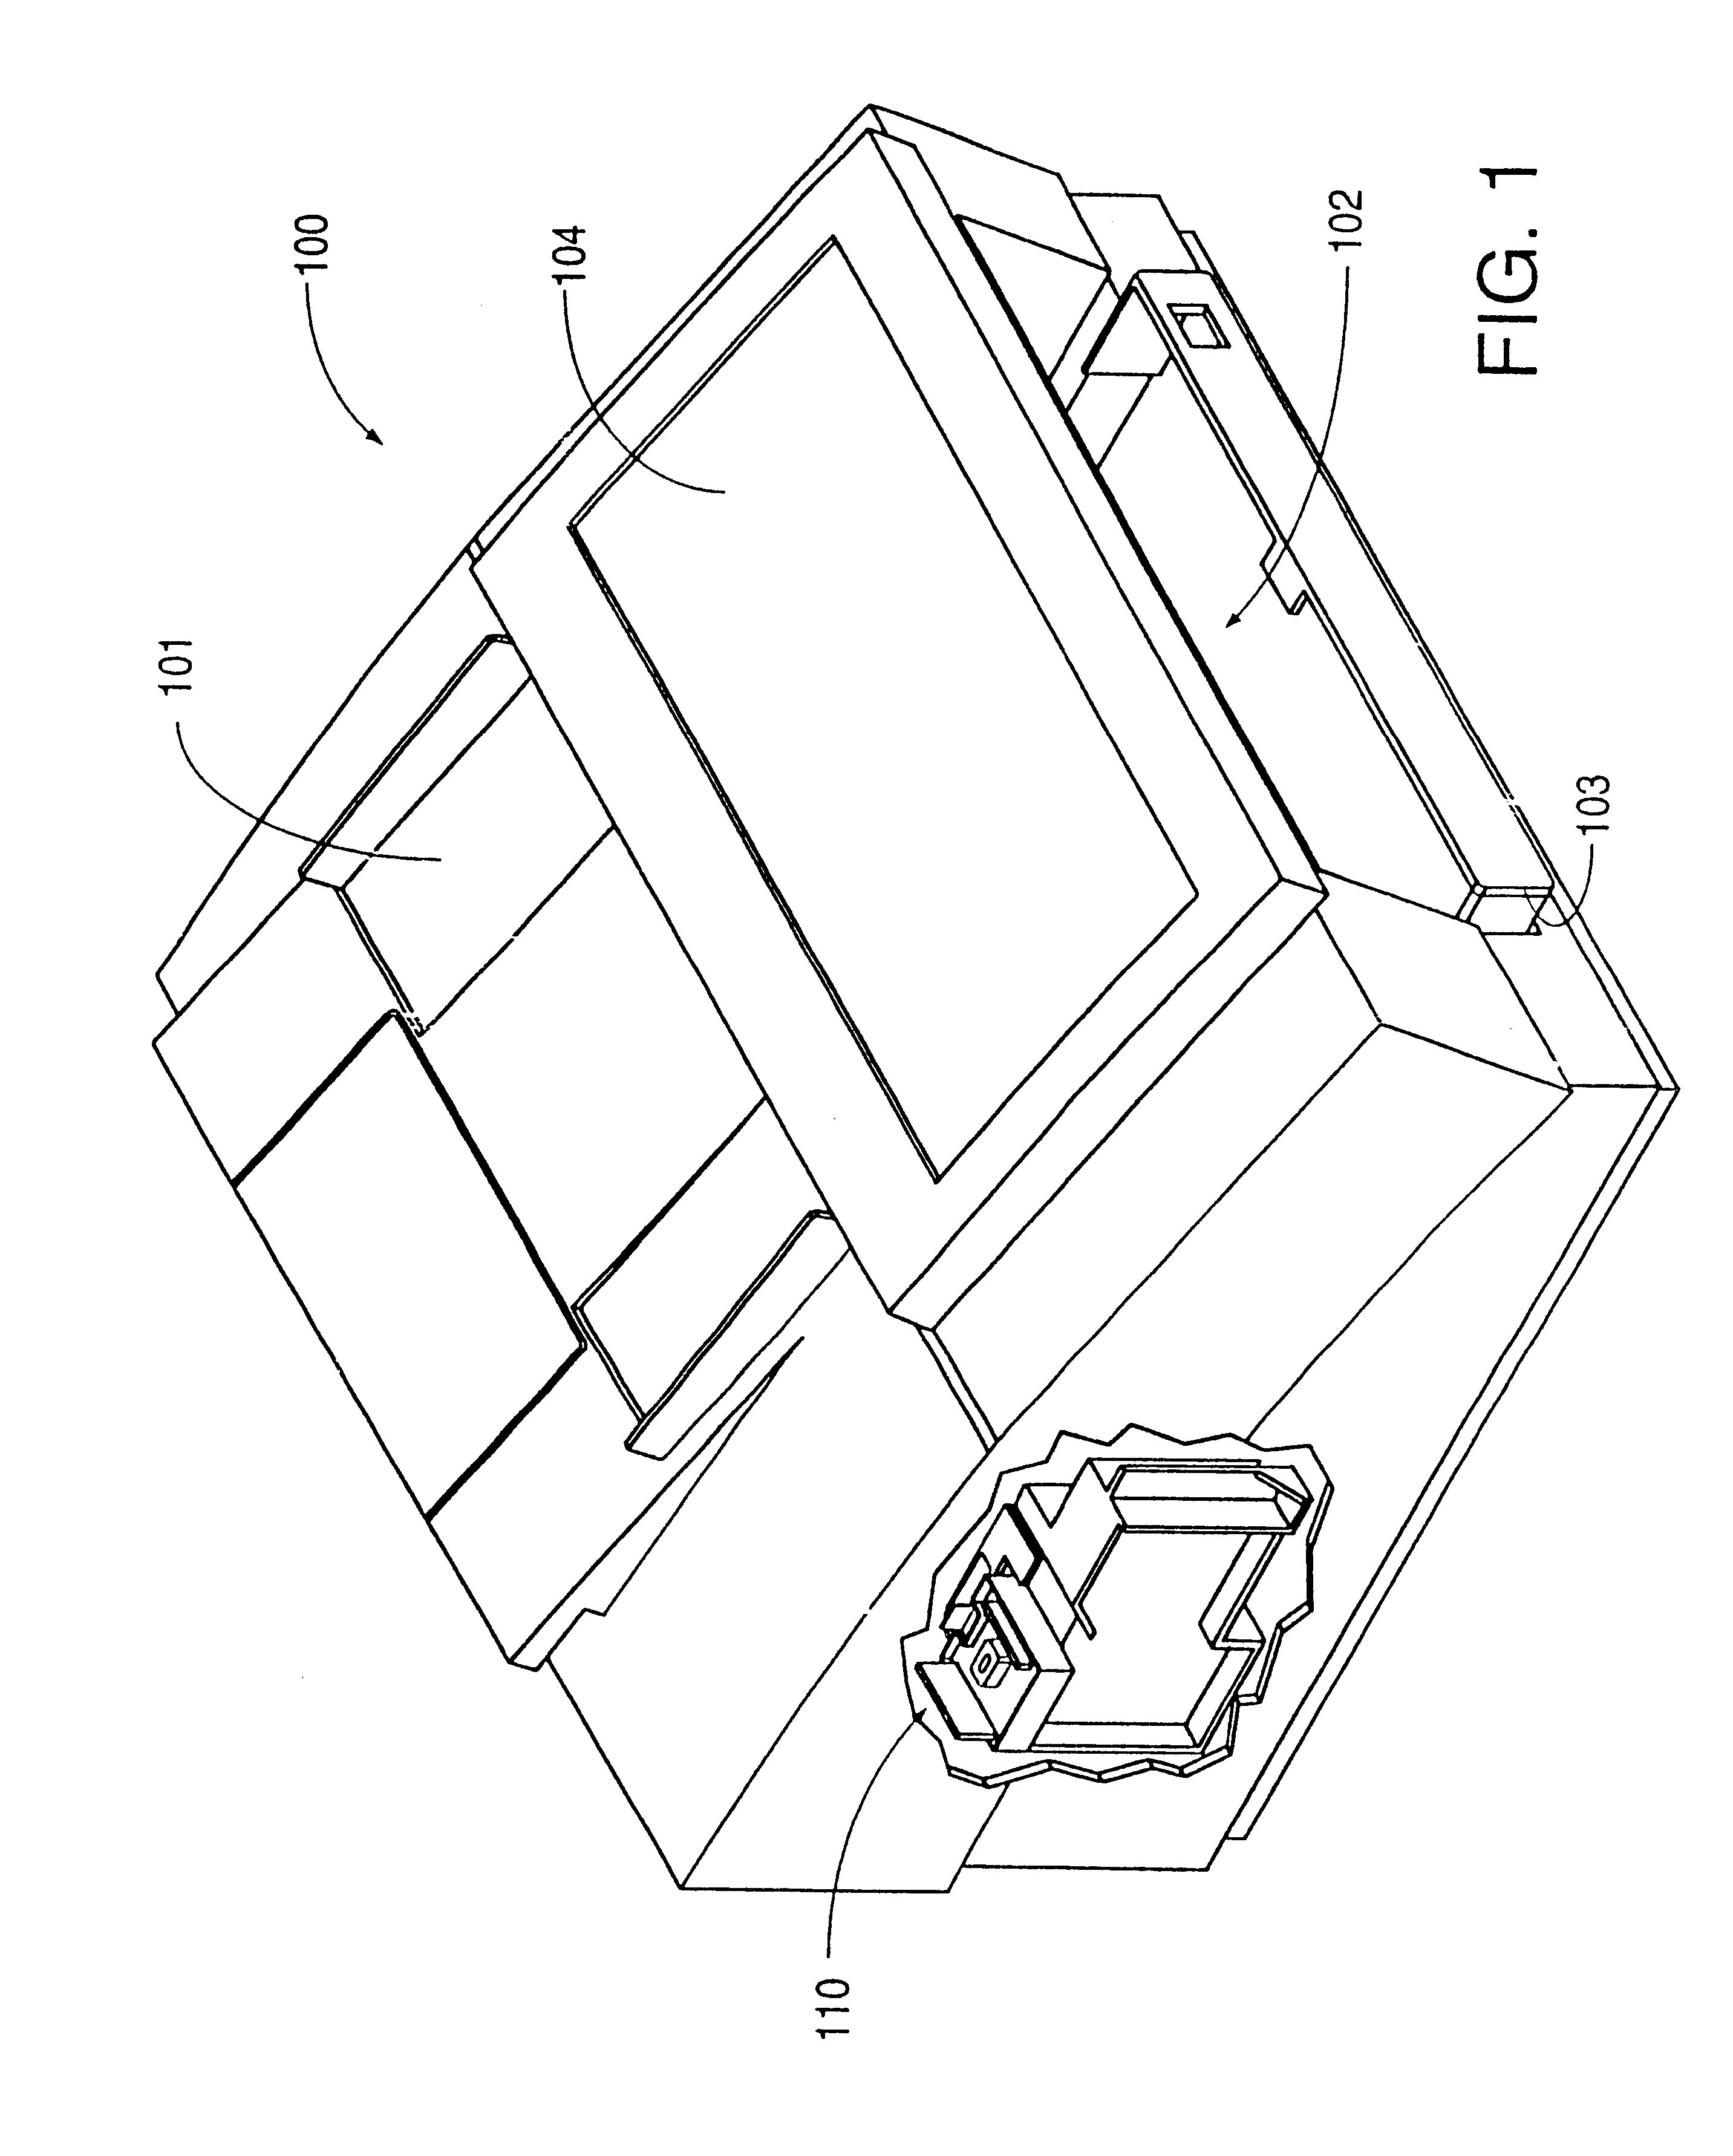 Positioning of service station sled using motor-driven cam